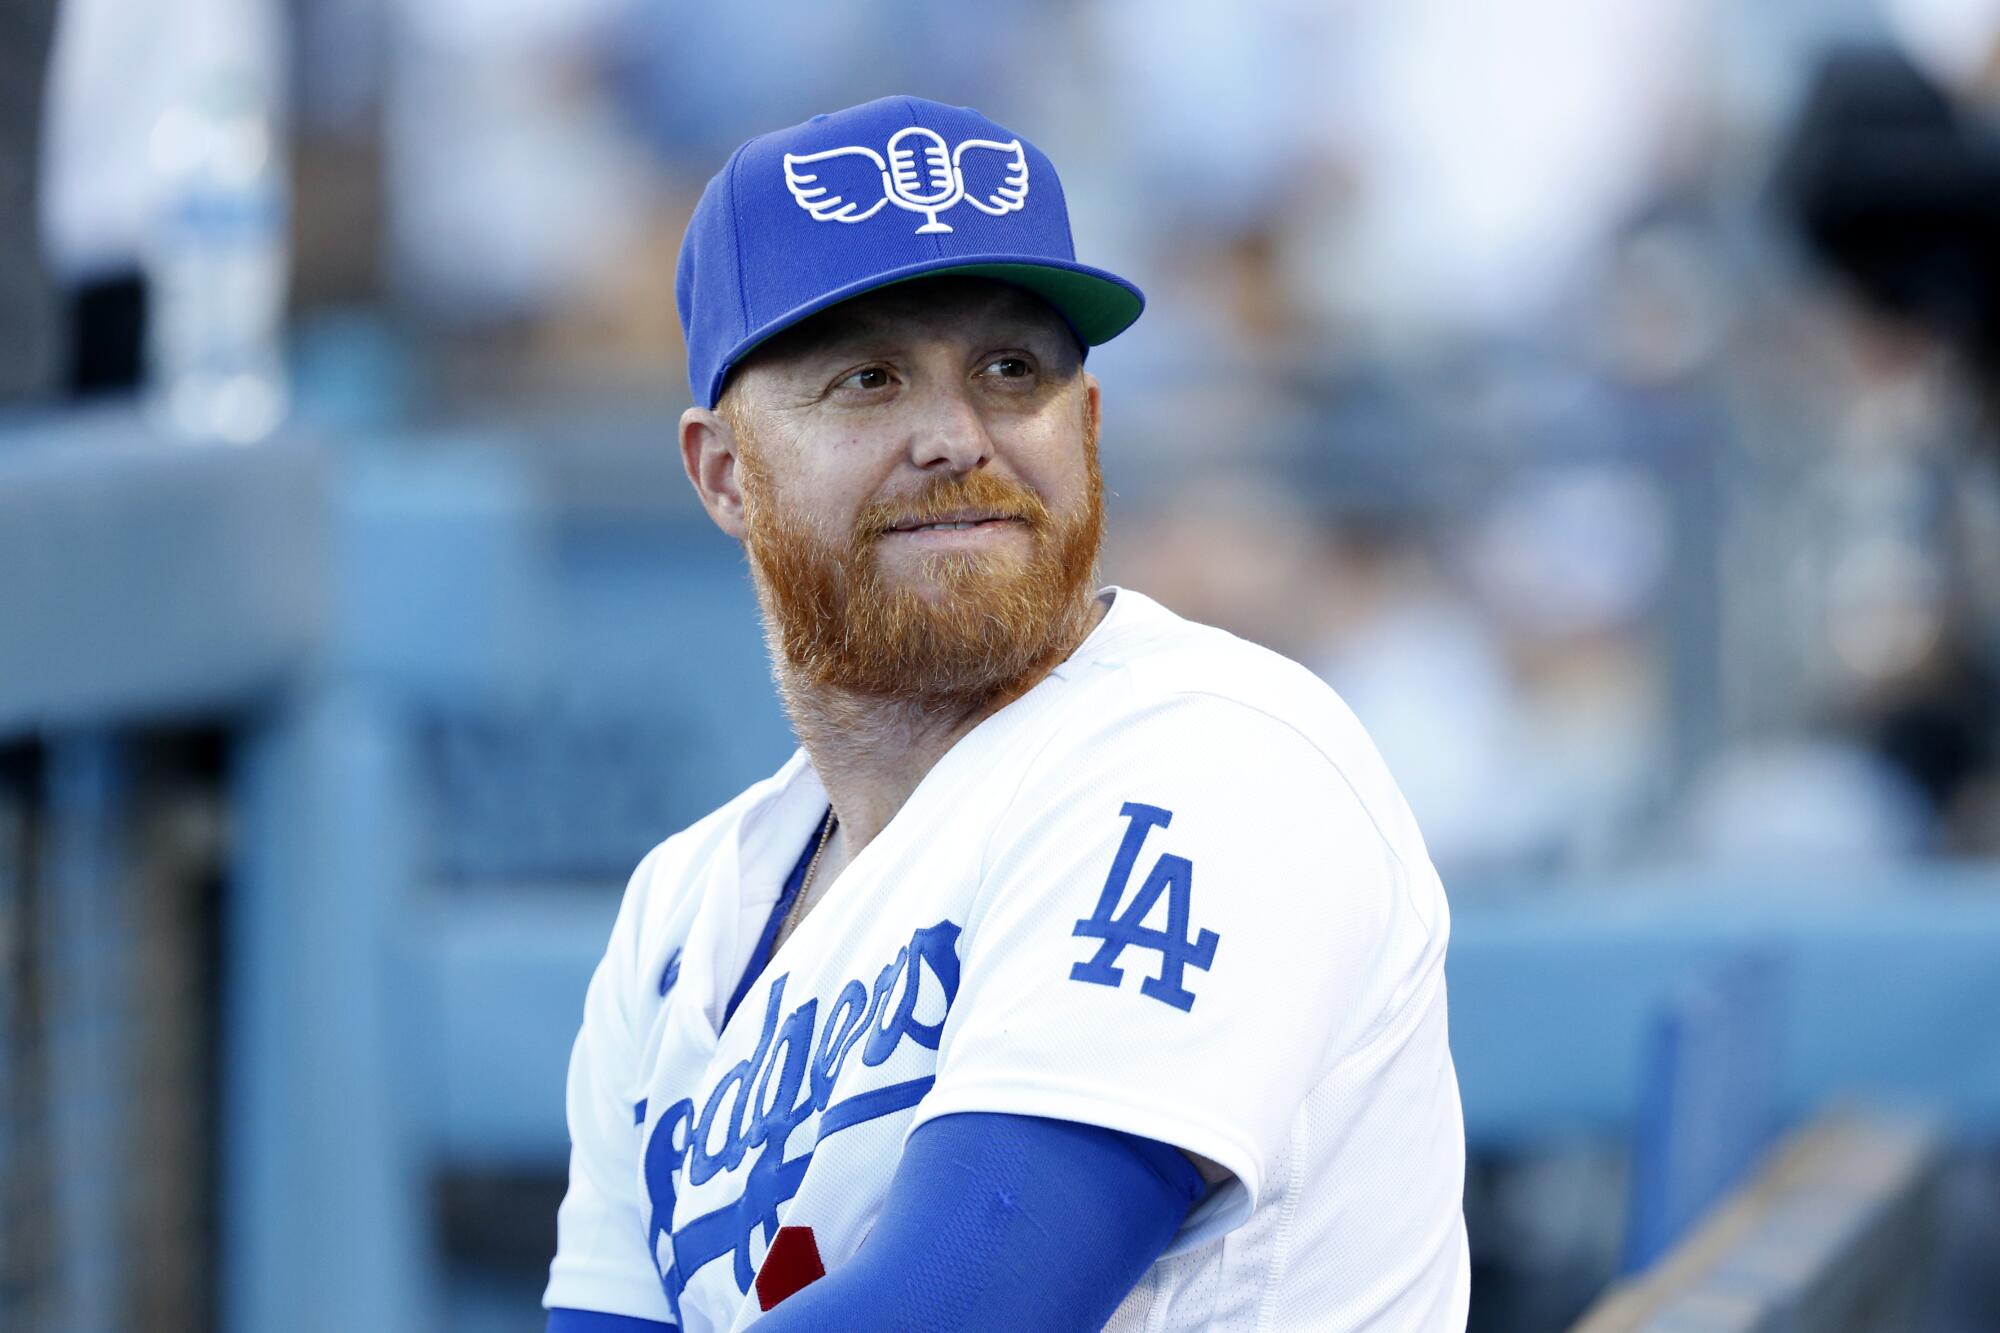 Dodgers third baseman Justin Turner wears a cap paying tribute to legendary broadcaster Vin Scully.